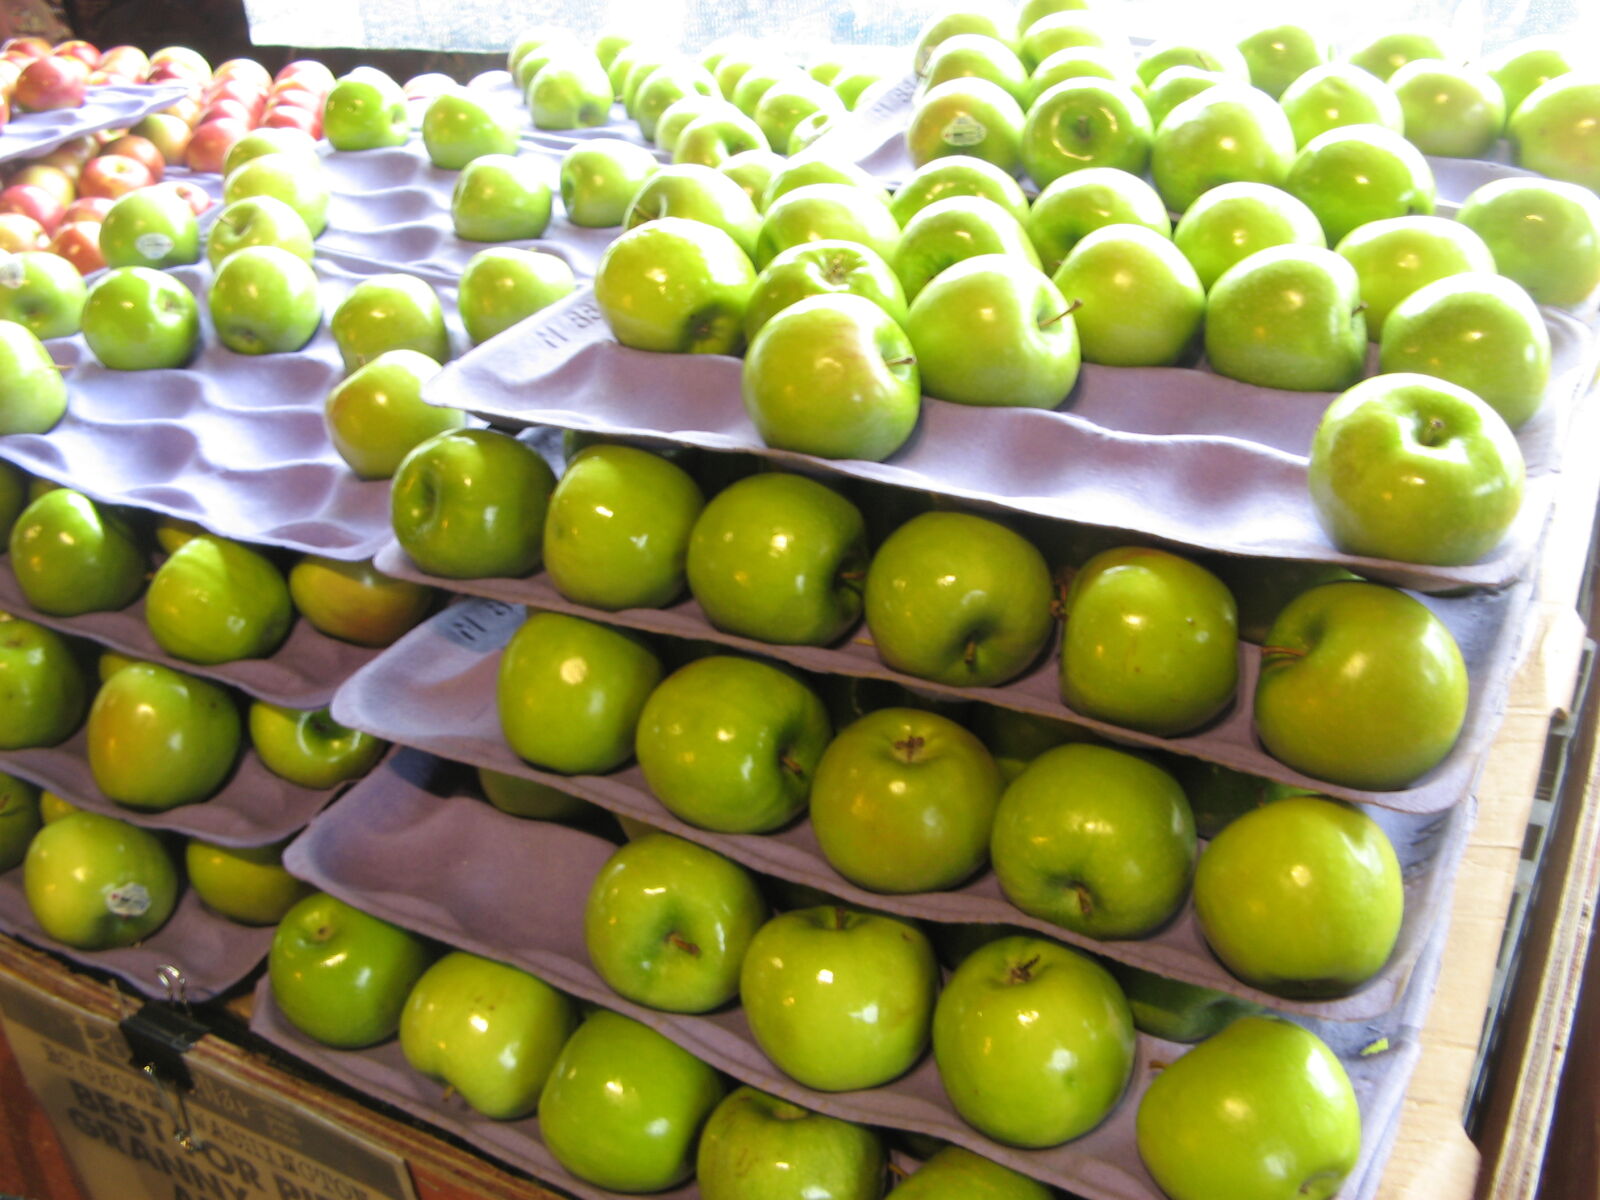 Canon POWERSHOT A700 sample photo. Organic, green apples, store photography